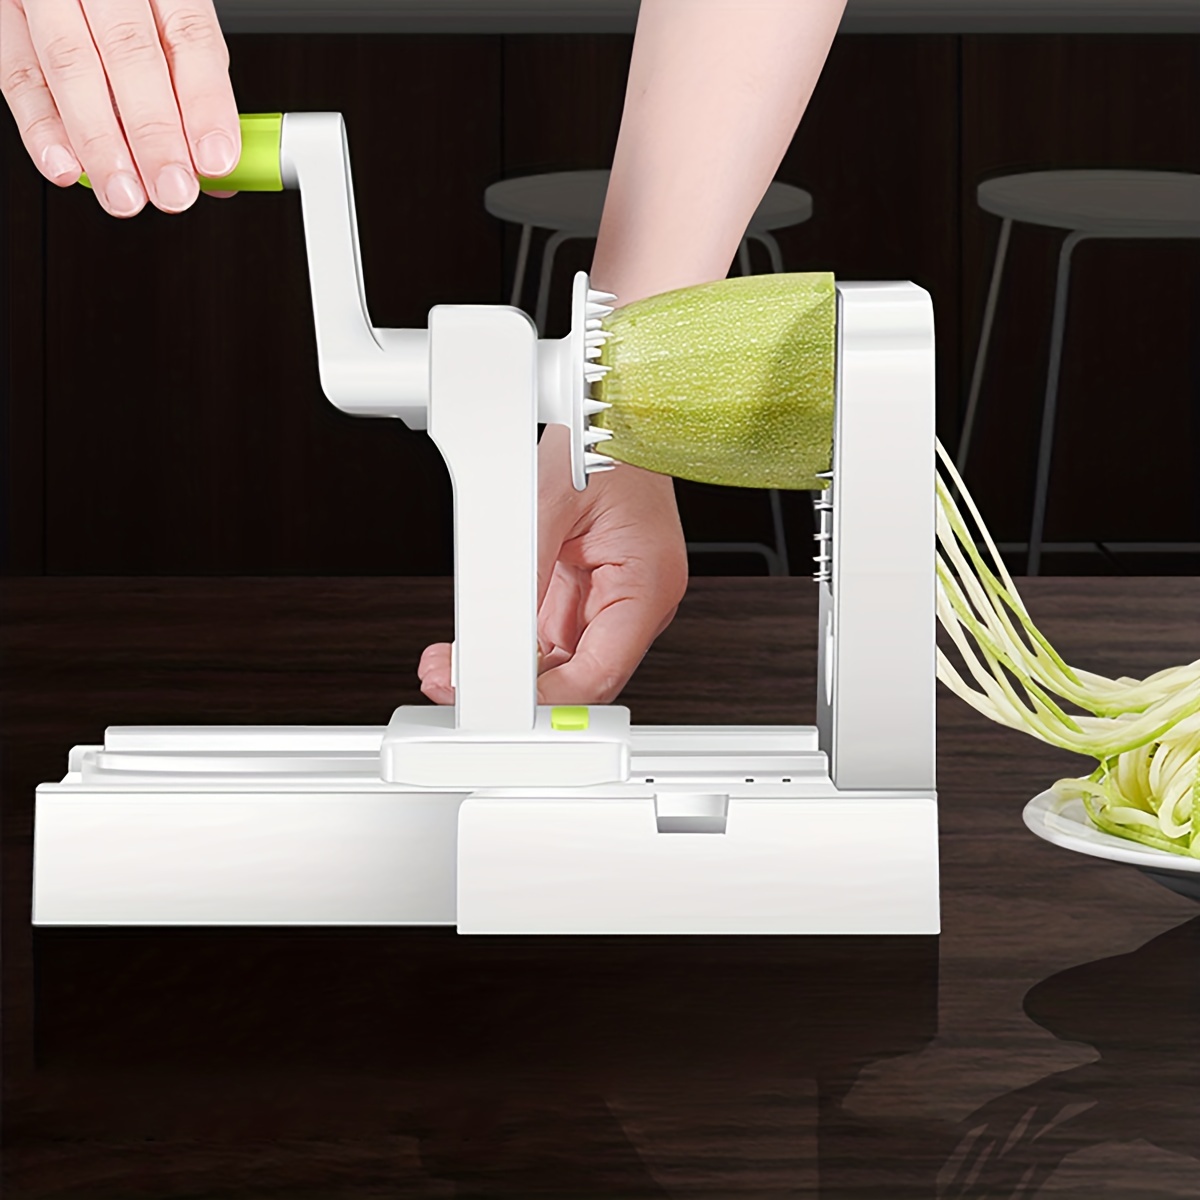 Table Top Noodle Making Machine